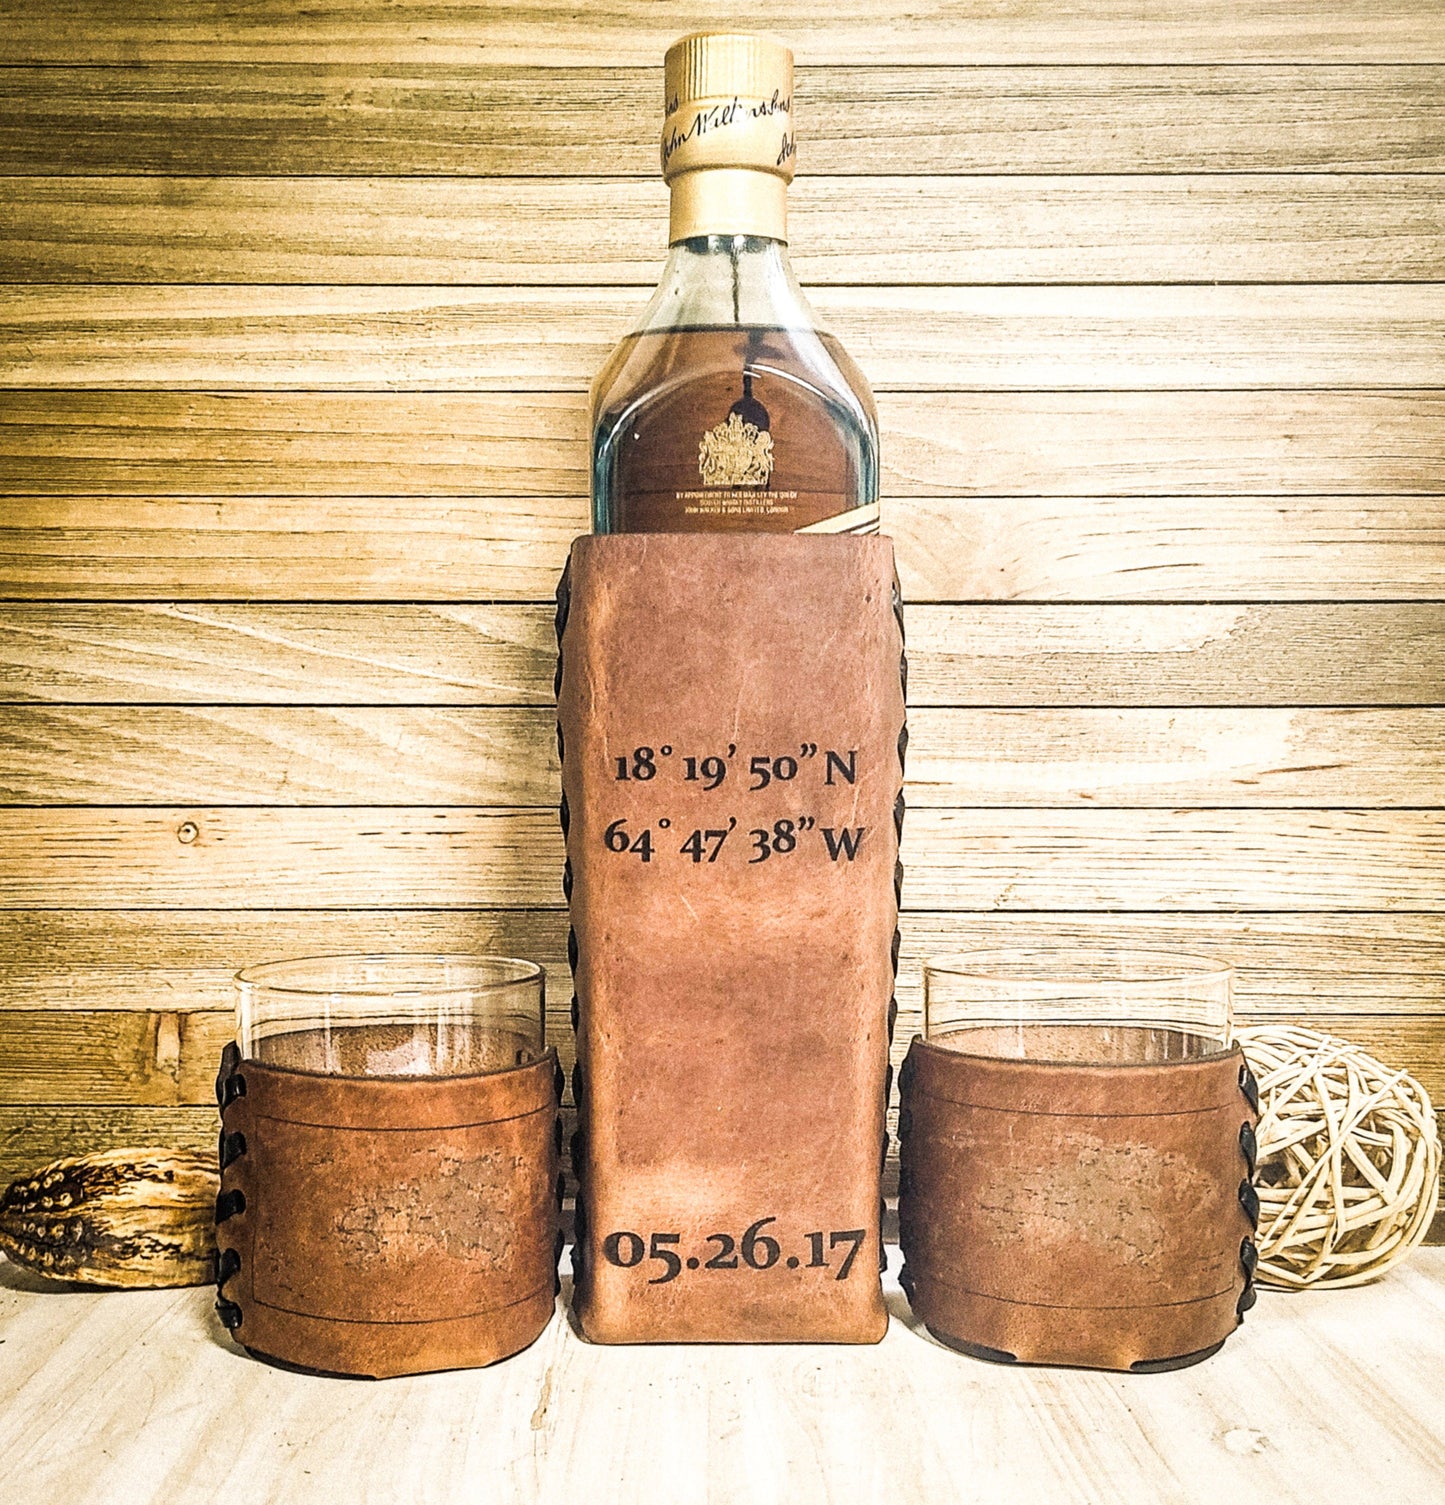 Wedding anniversary whiskey set wrapped in premium leather